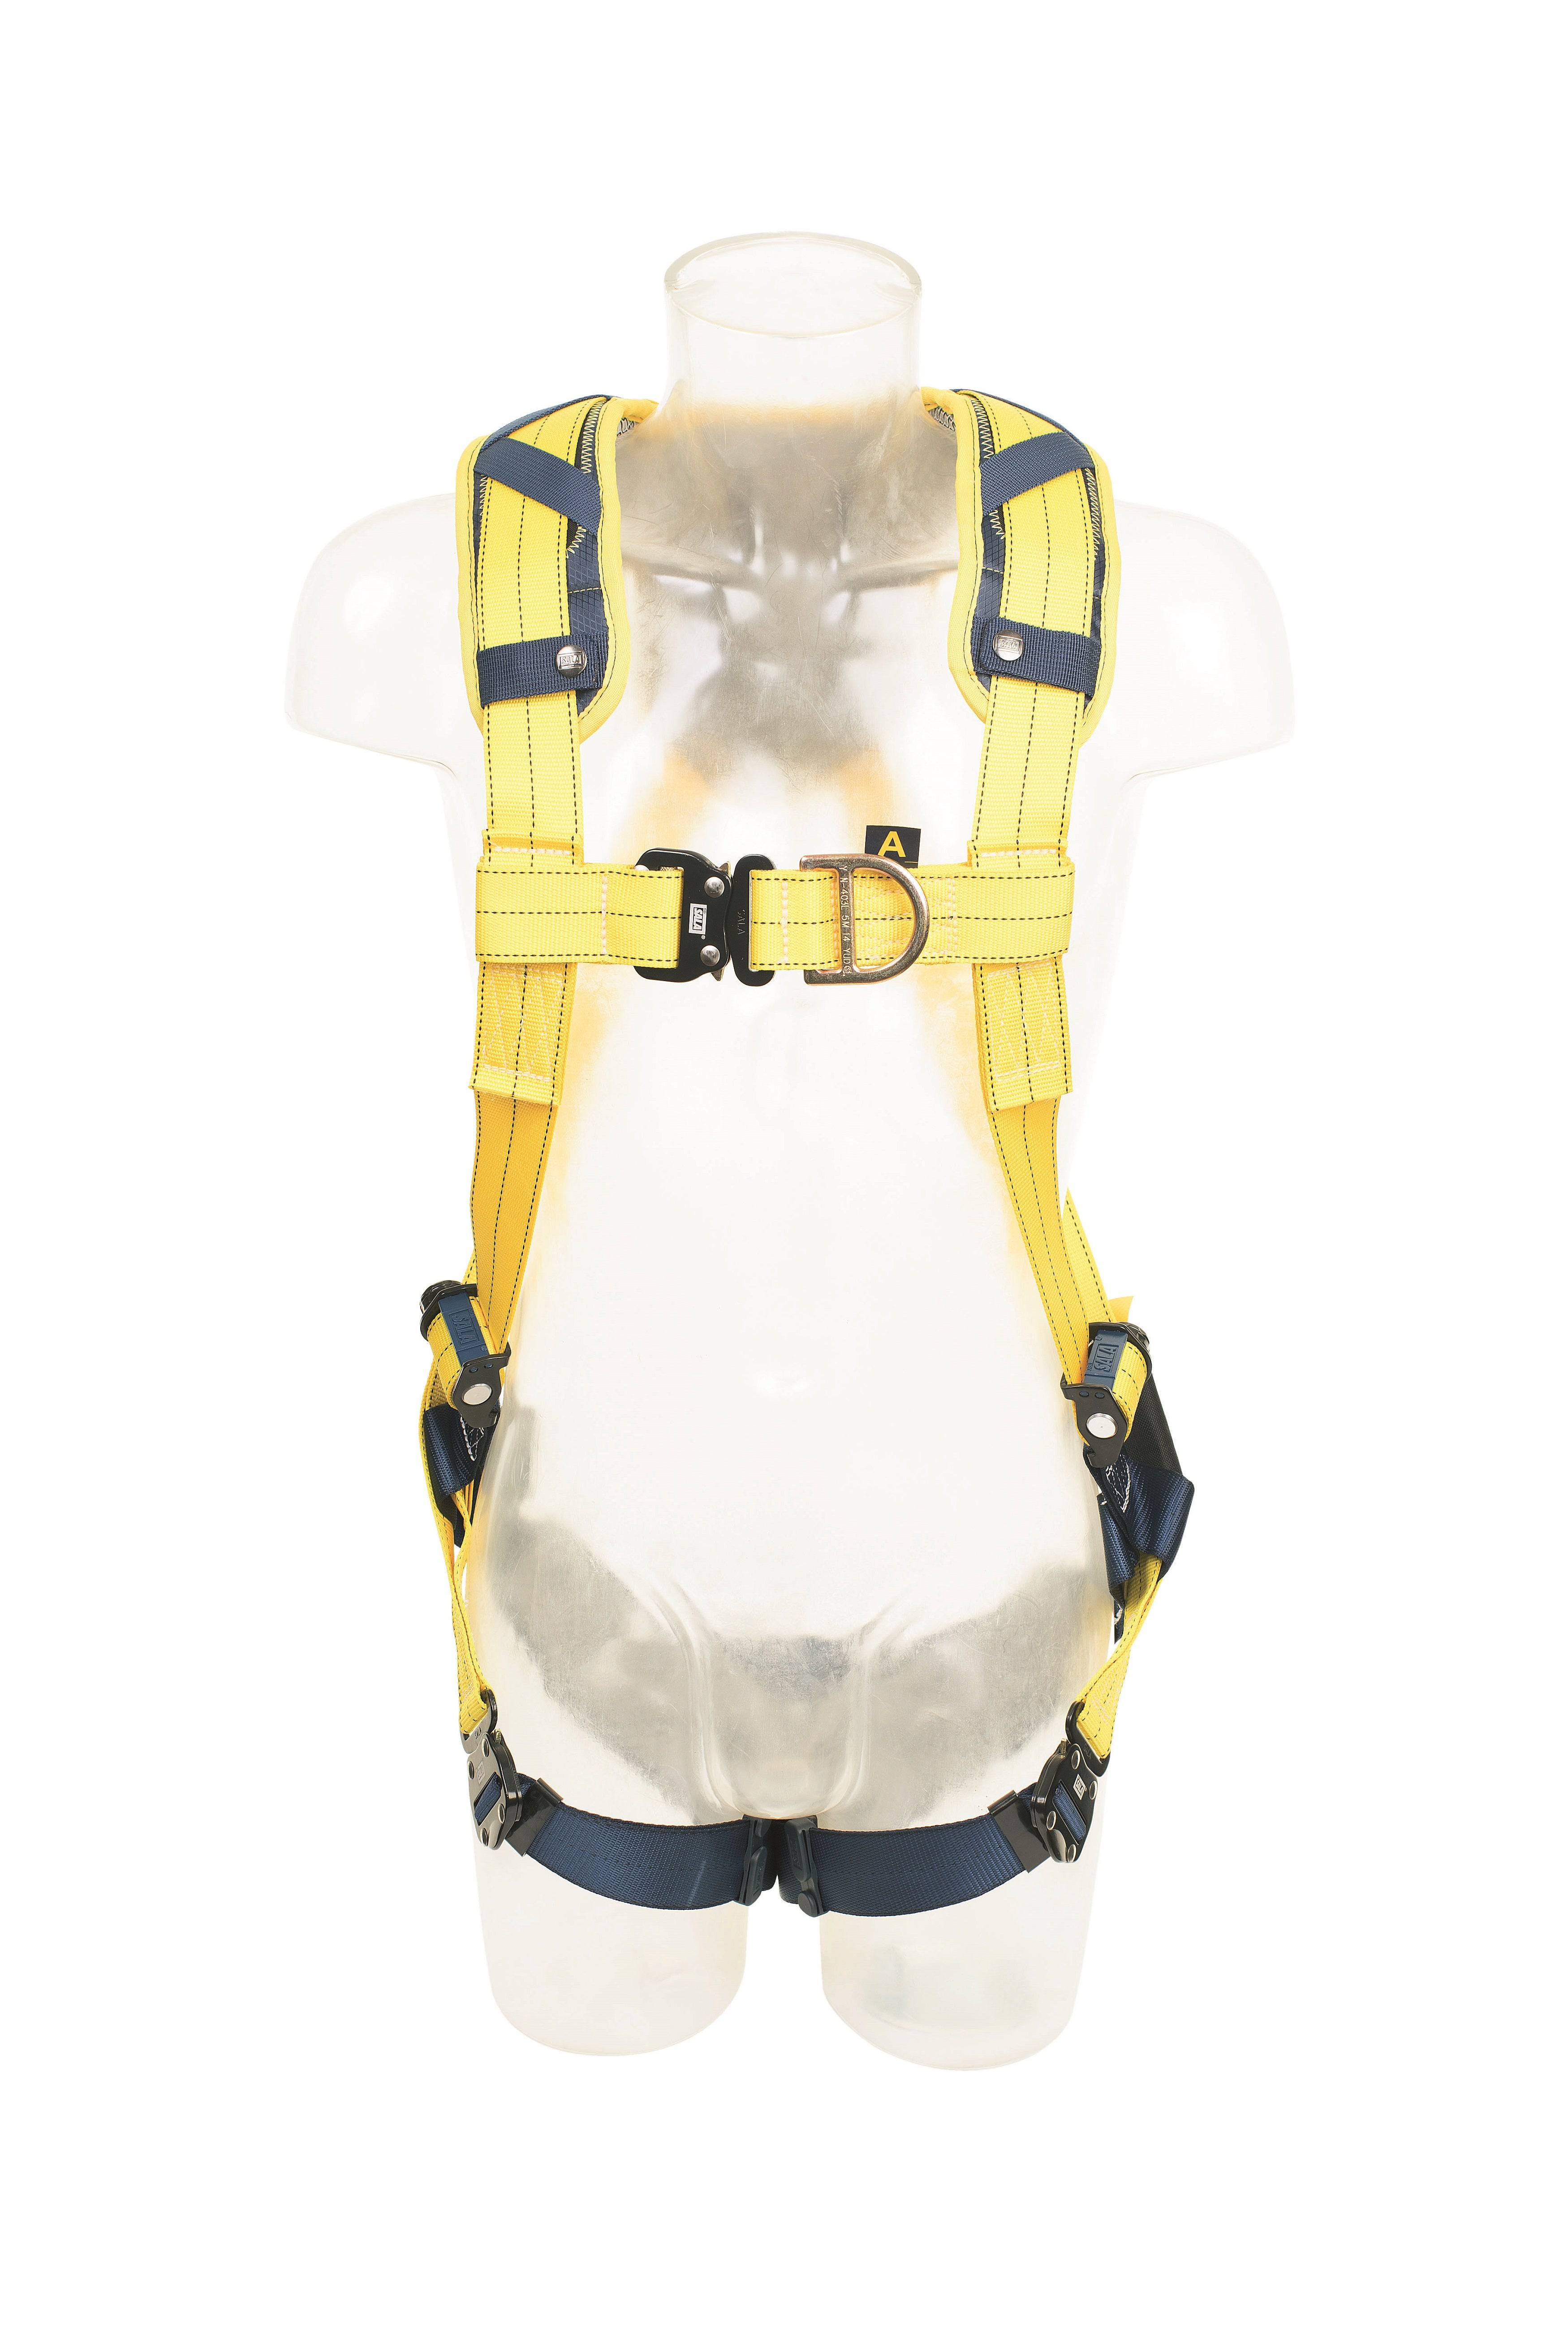 3M DBI SALA Delta Quick Connect Comfort Harness with Front and Rear Attachment Points - SecureHeights